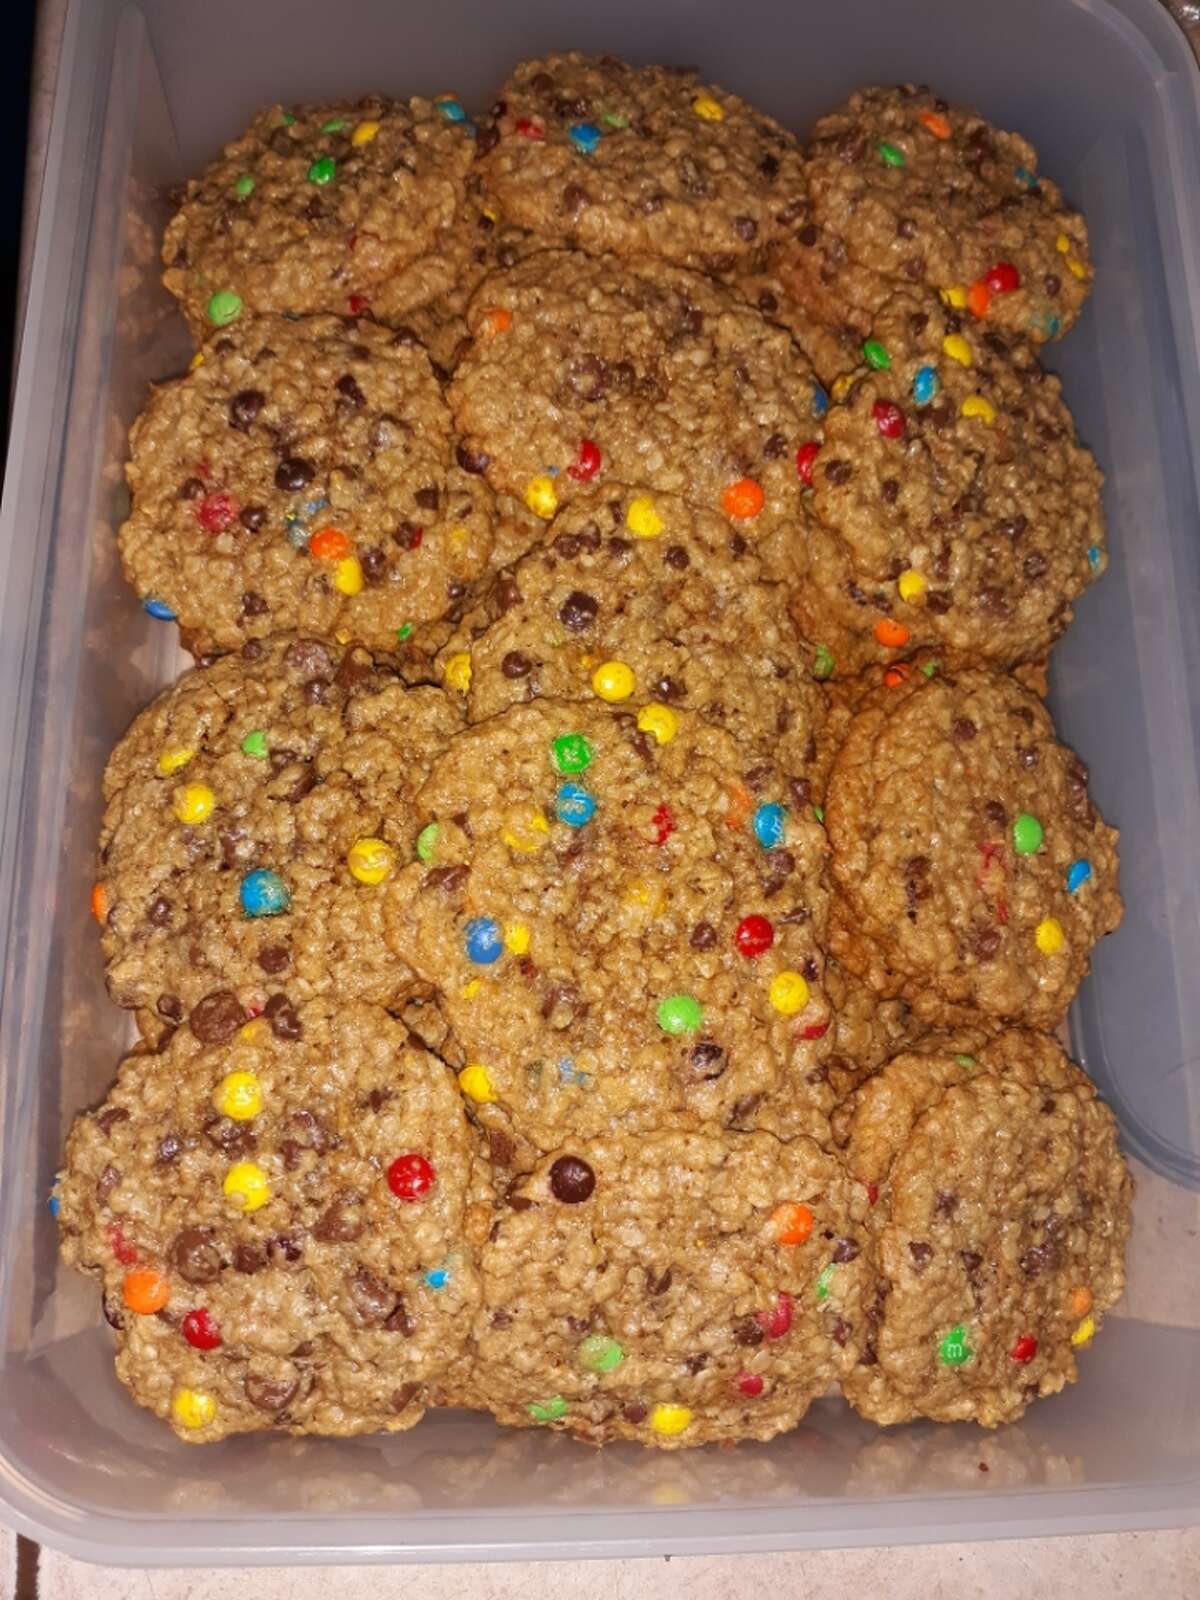 Lovina shares a recipe for monster cookies in this week's Amish Kitchen.